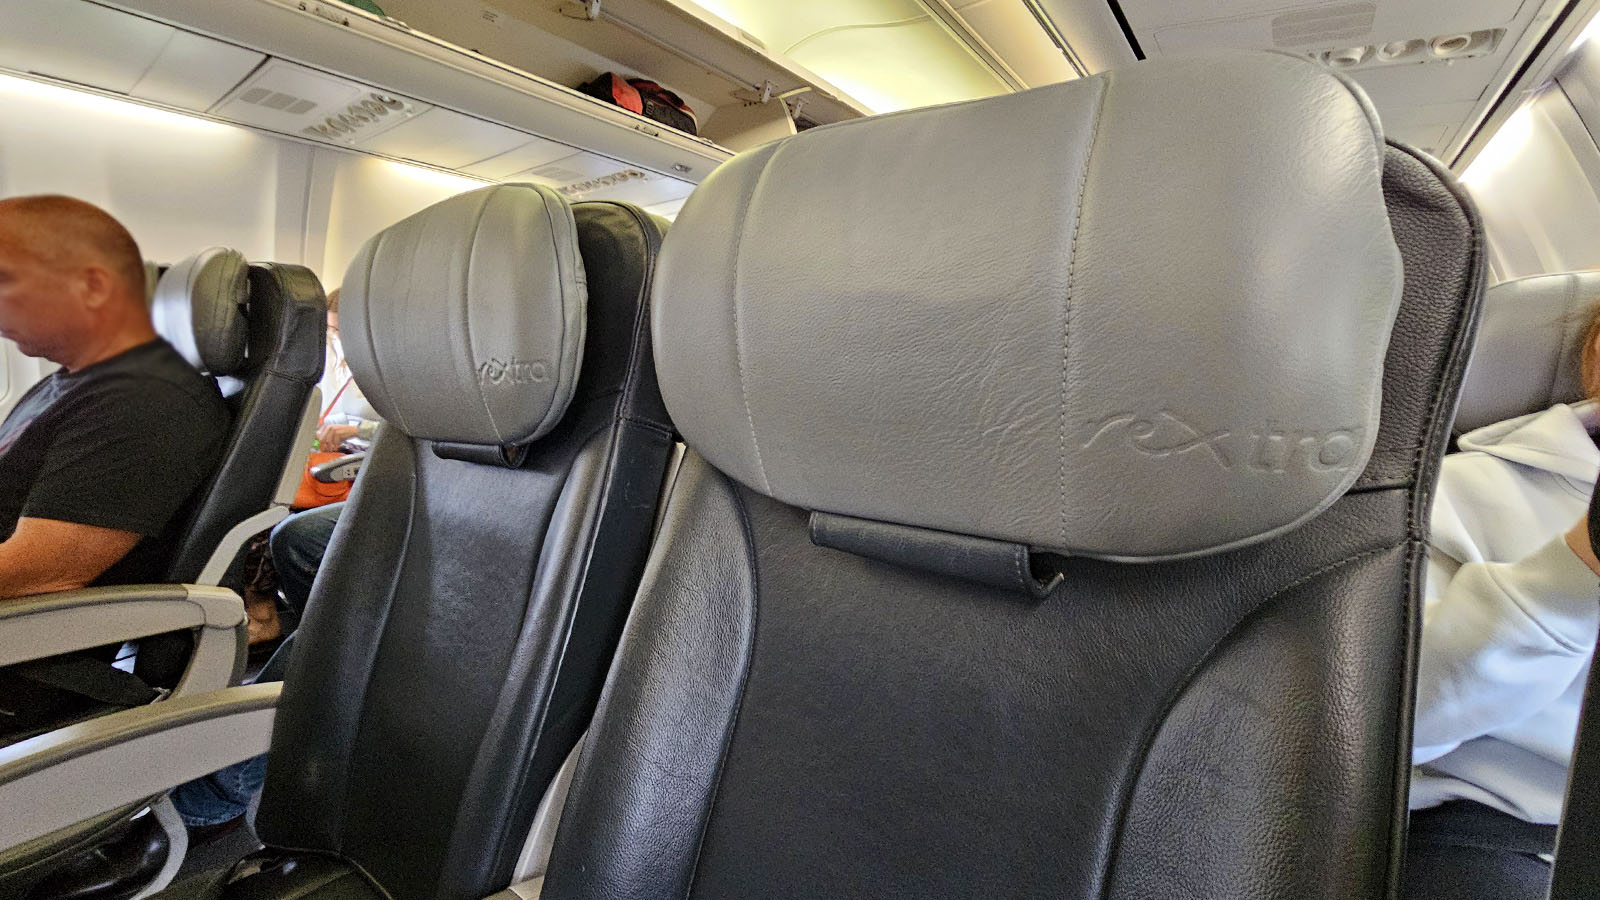 Chairs in Rex Boeing 737 Economy Class